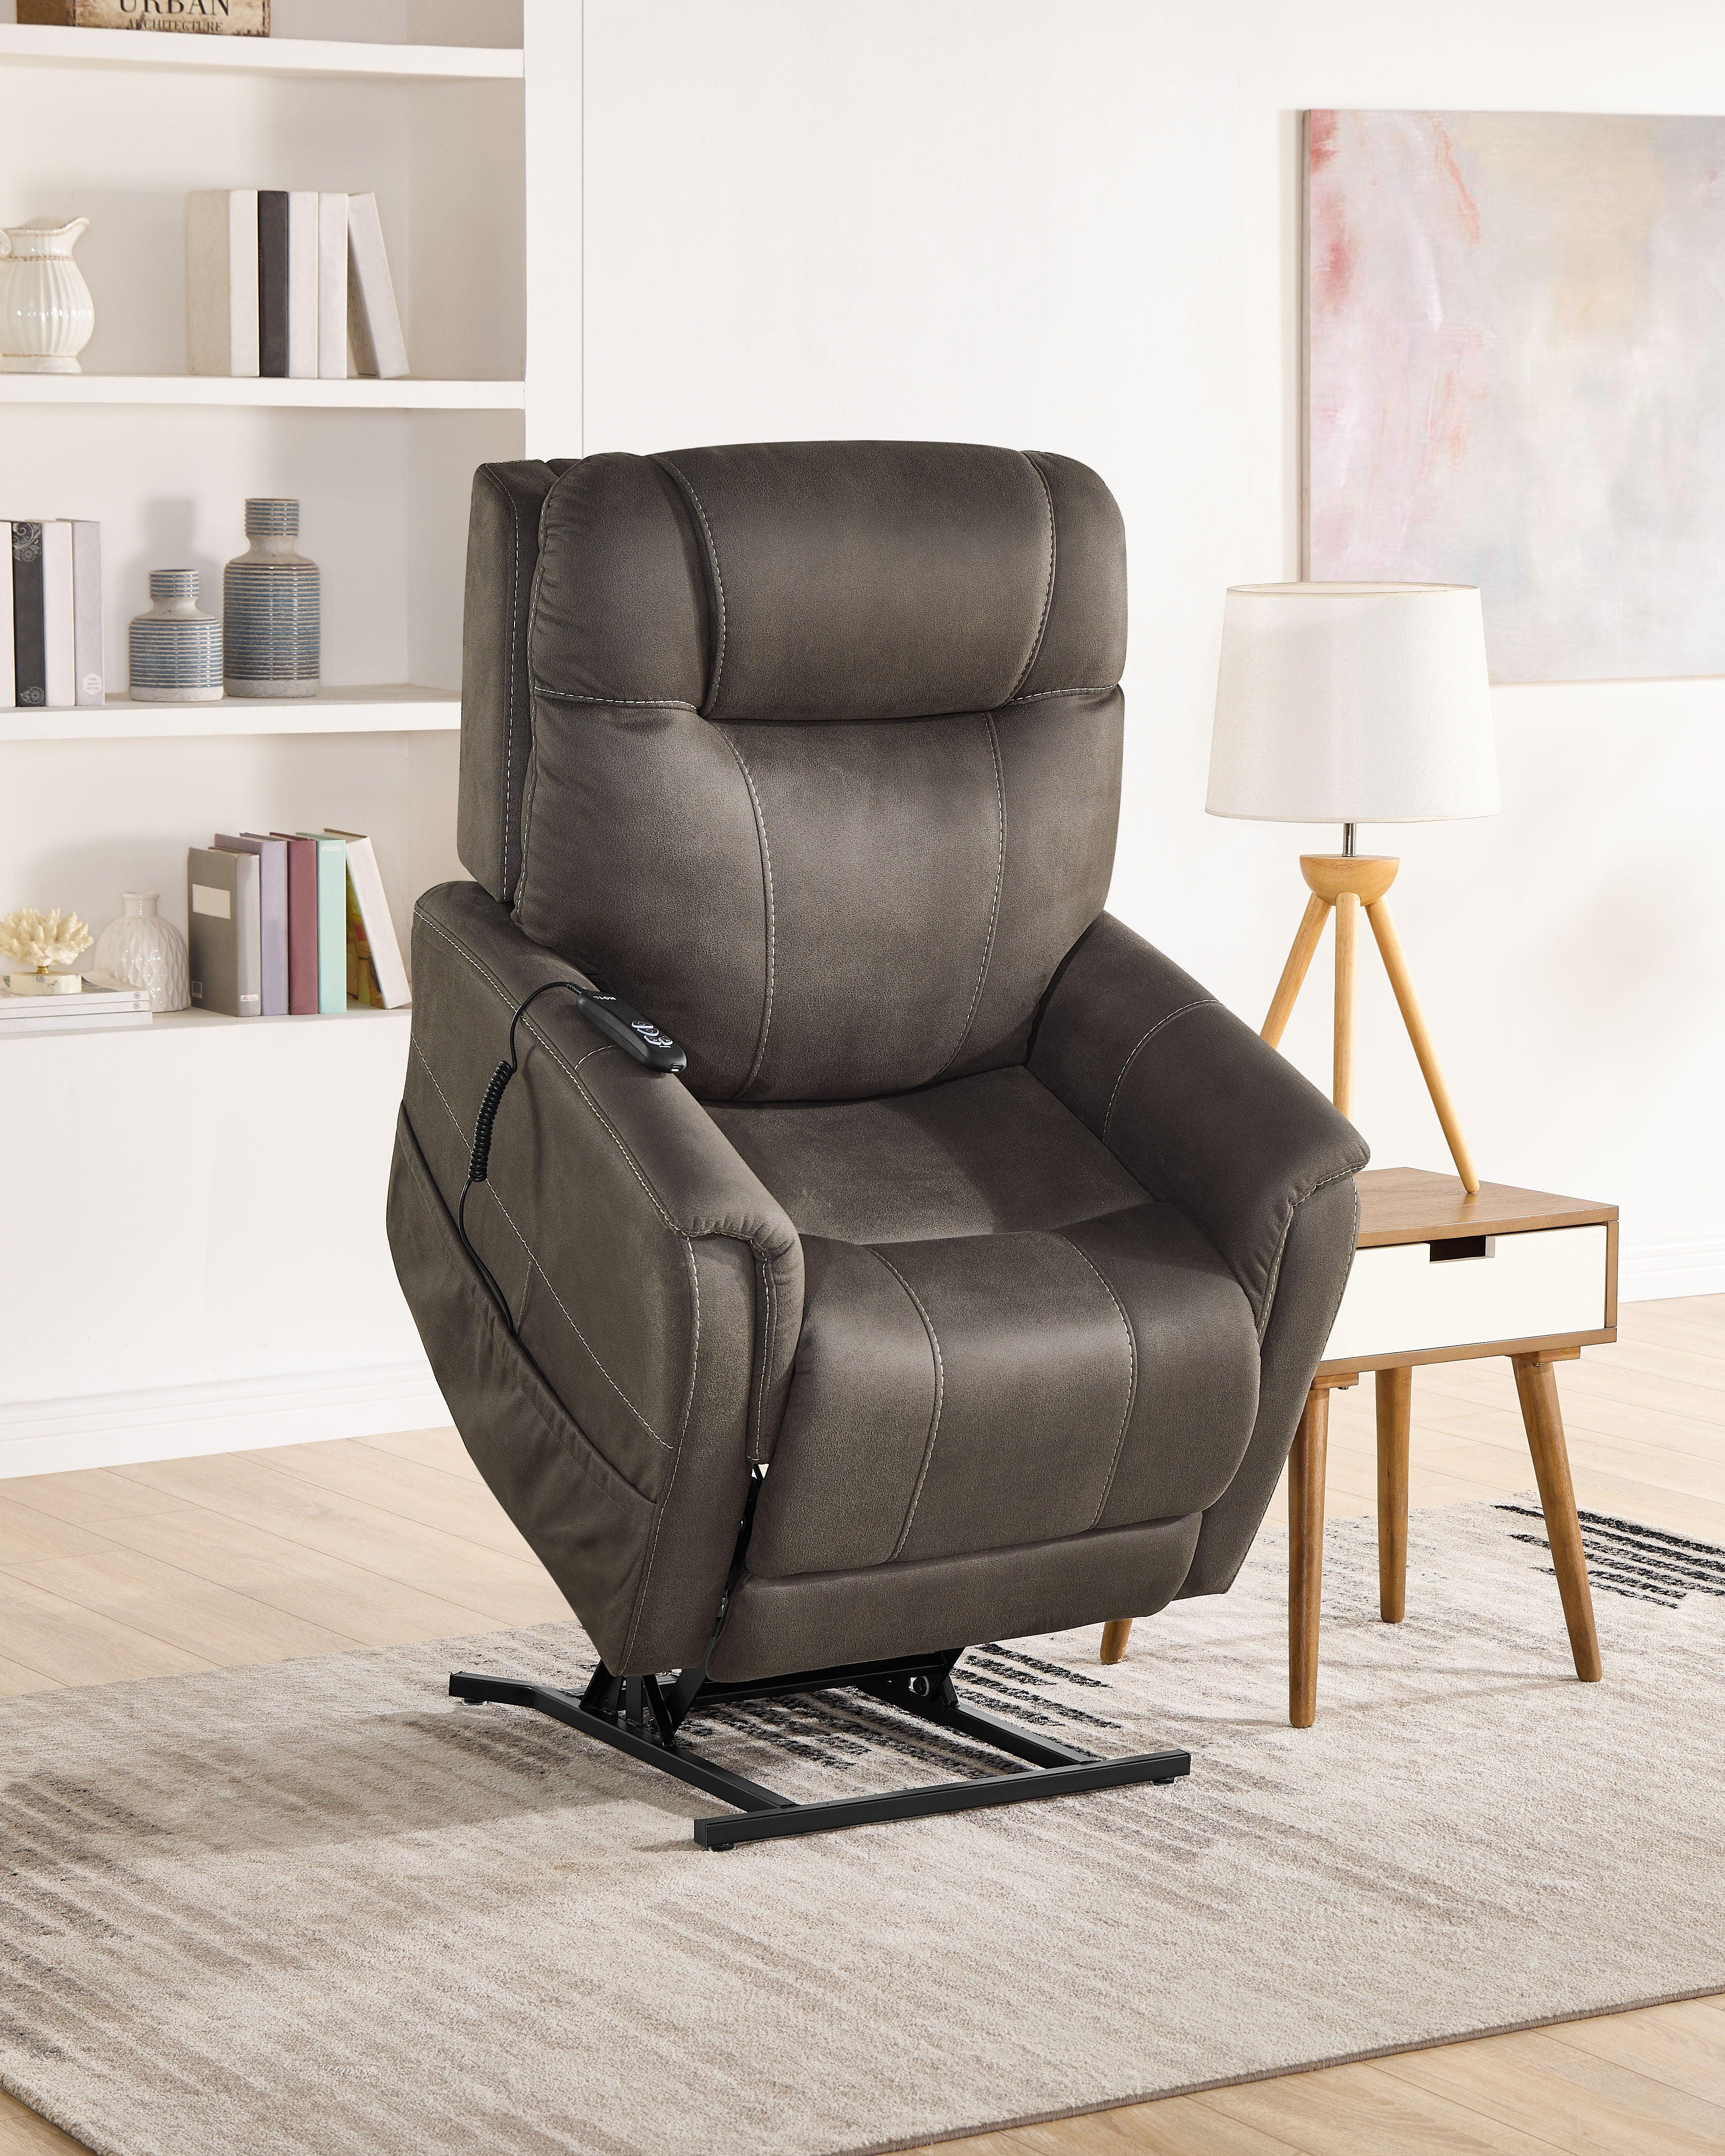 Steve Silver Furniture - Thames - Power Lift Chair With Power Headrest - Brown - 5th Avenue Furniture